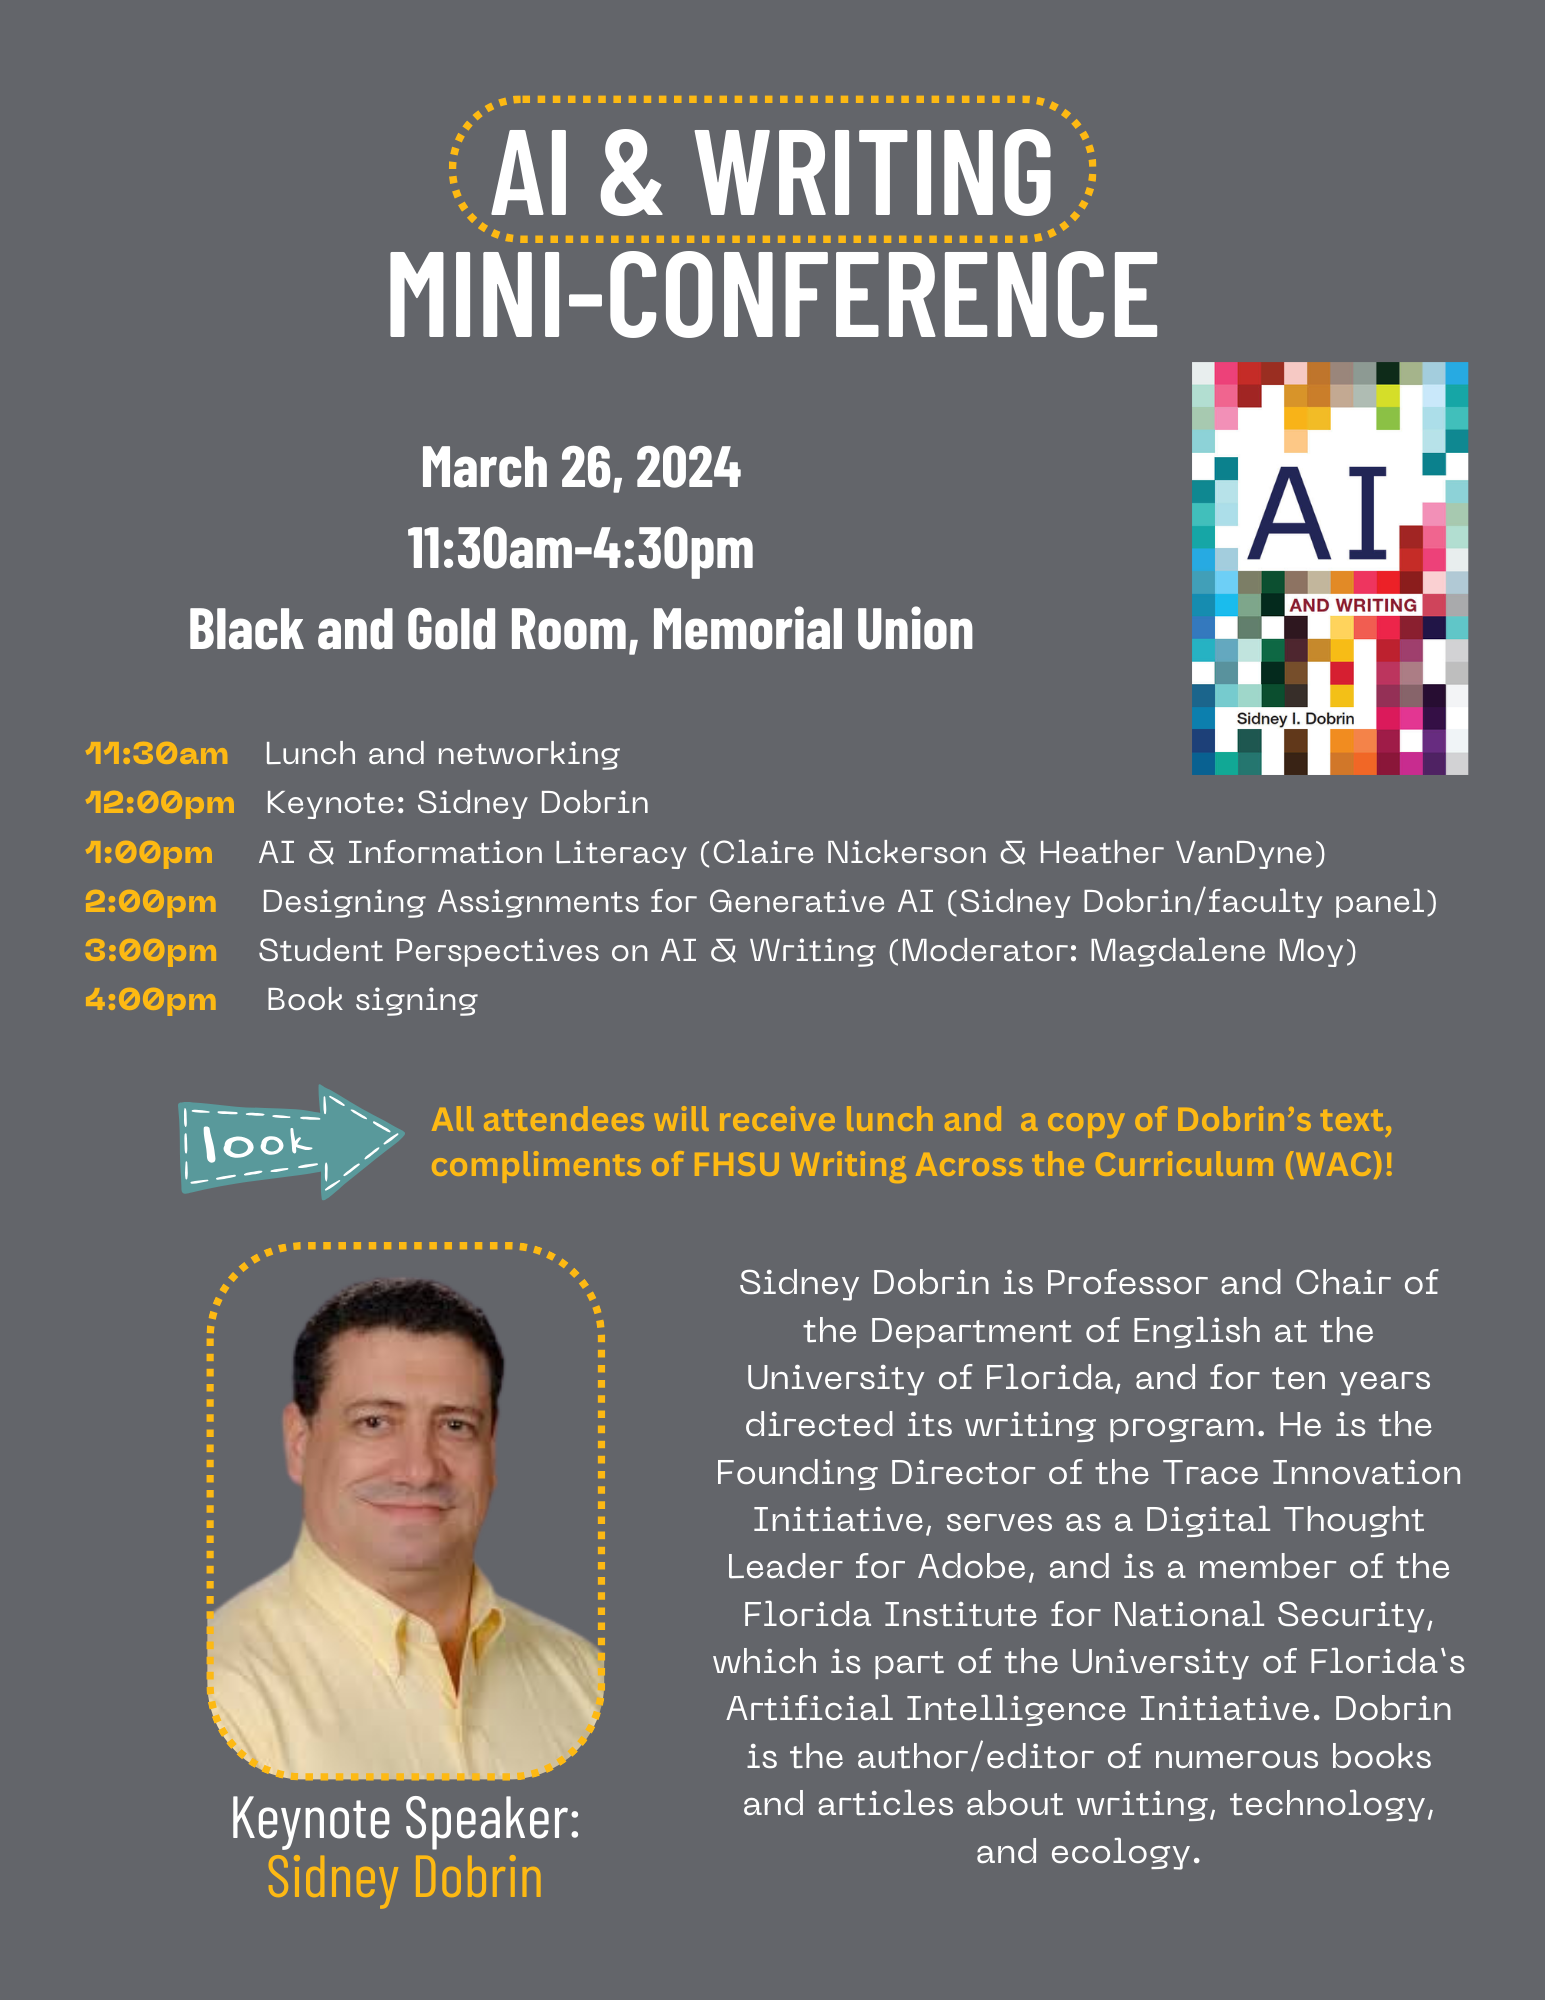 Mini-Conference 3/26/24 11:30-4:30 in the Black and Gold Room